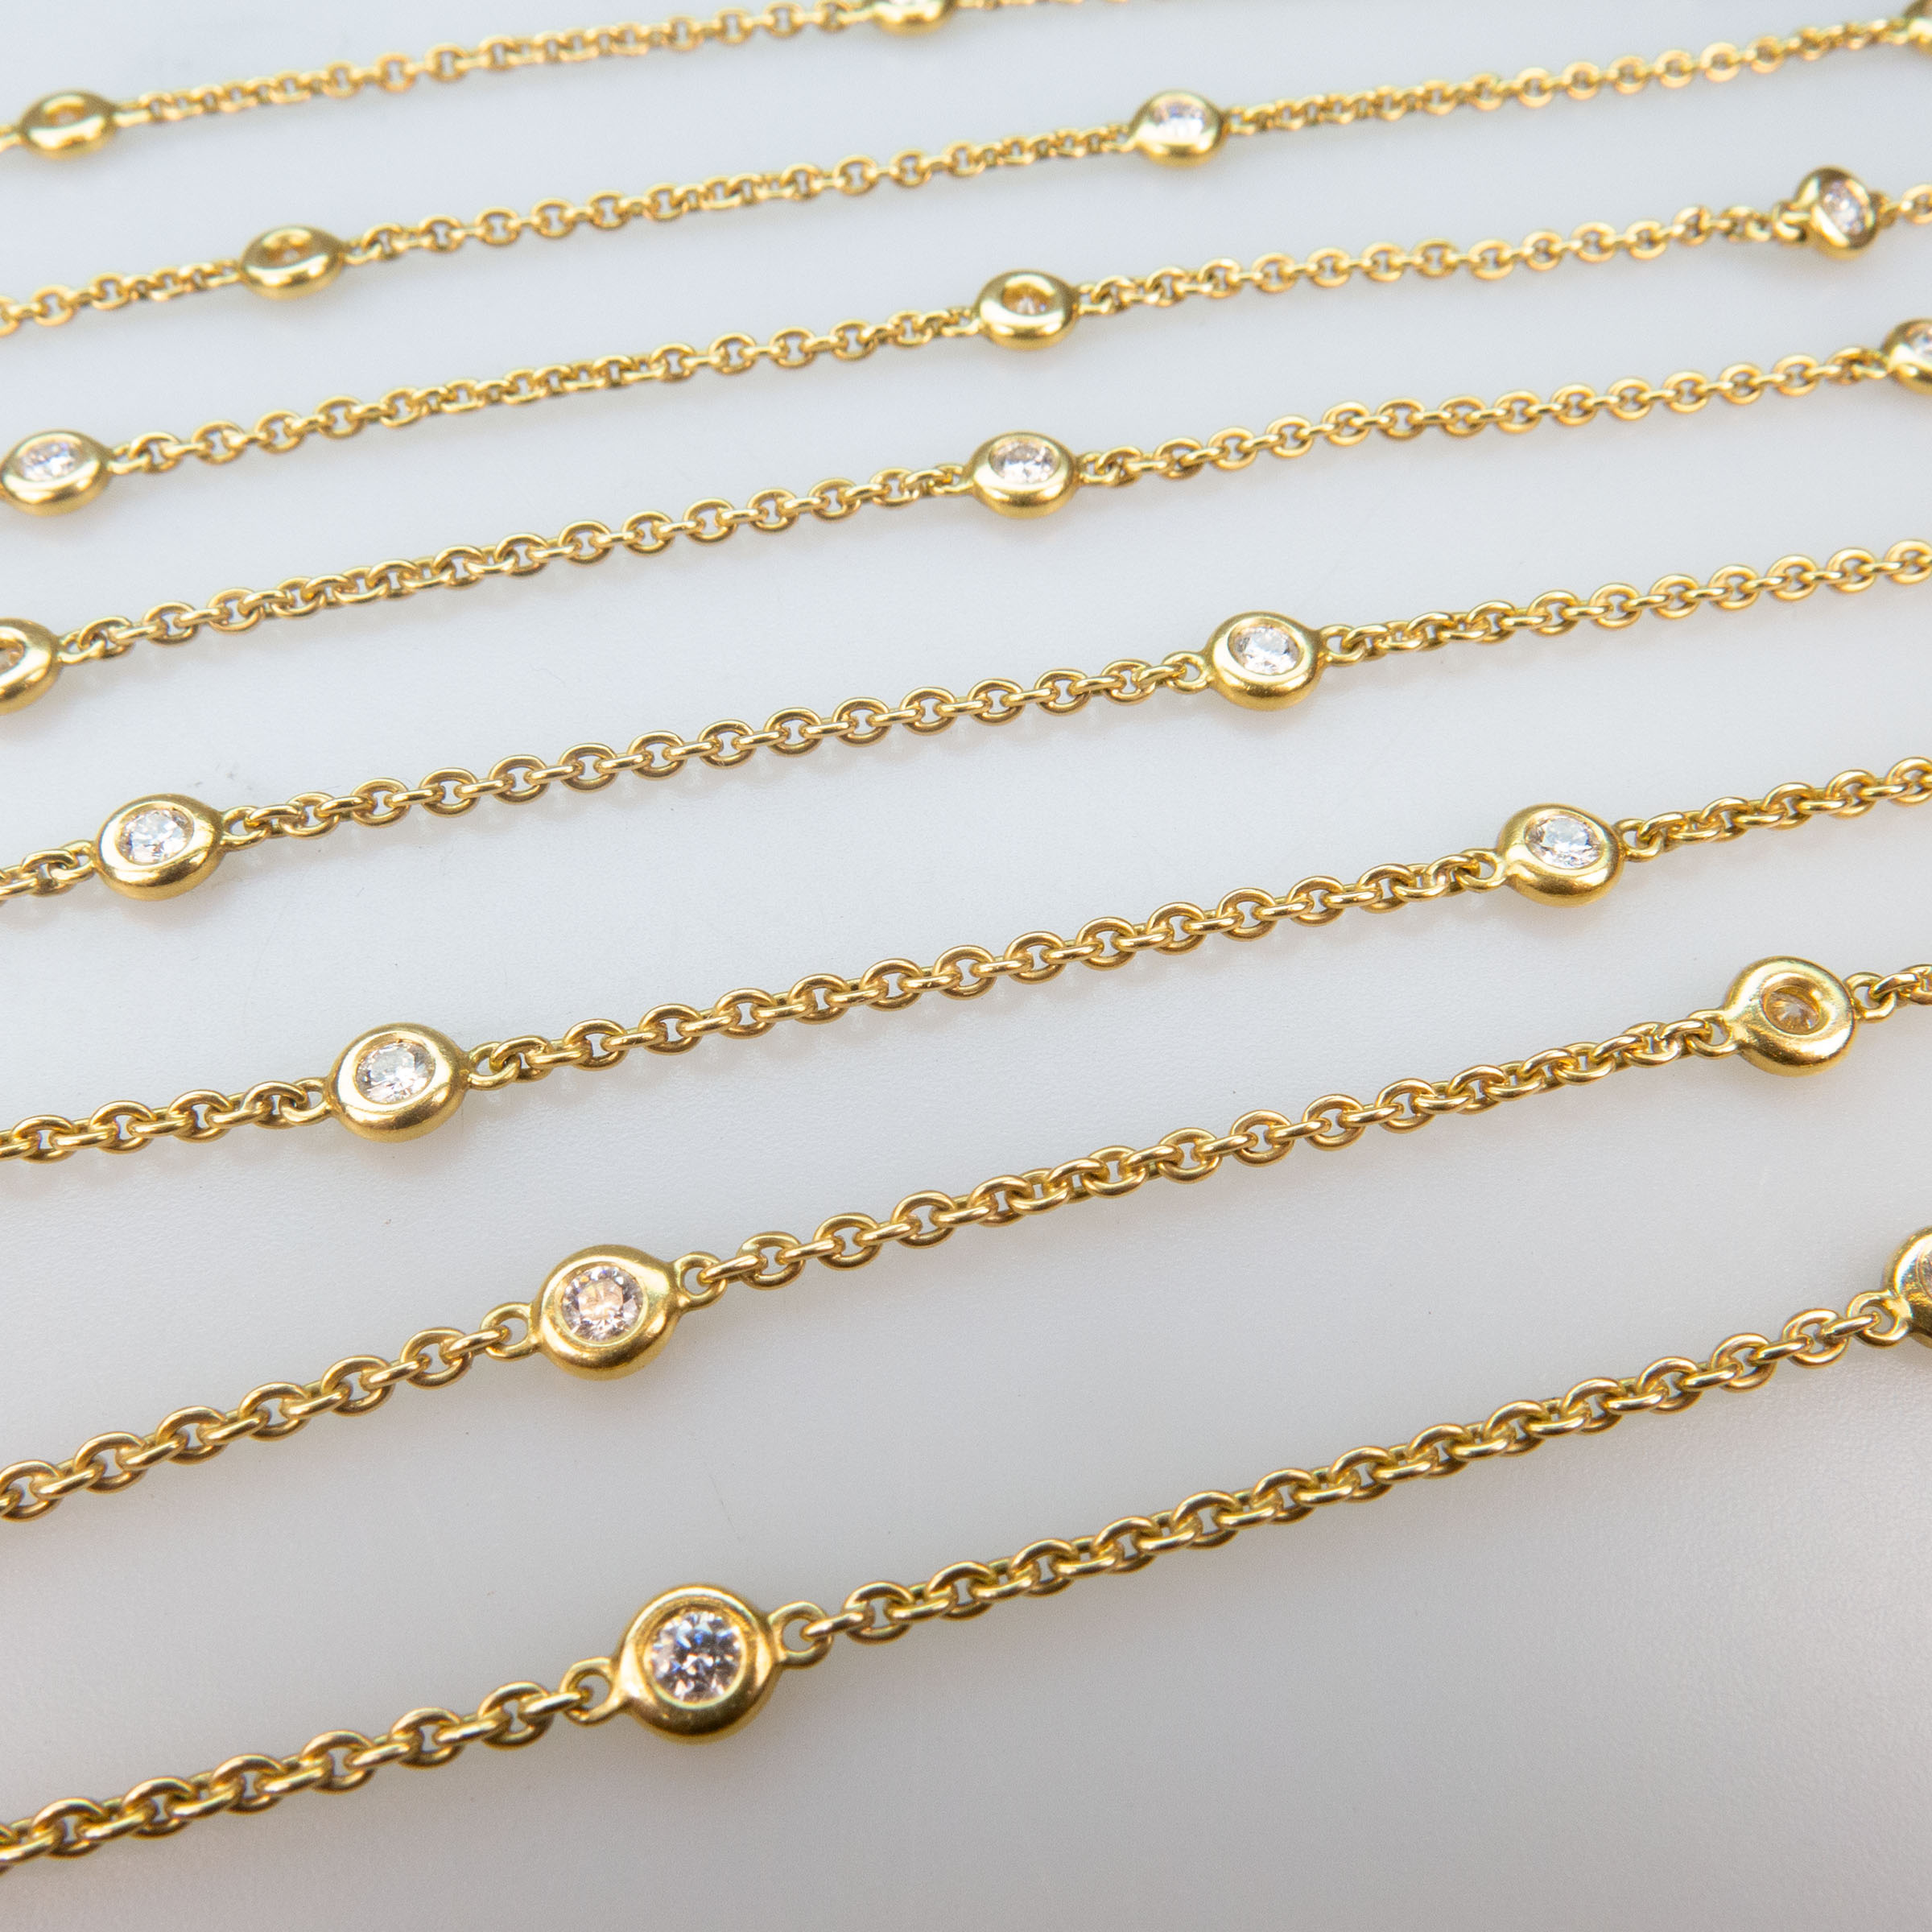 Long 18k Yellow Gold Necklace